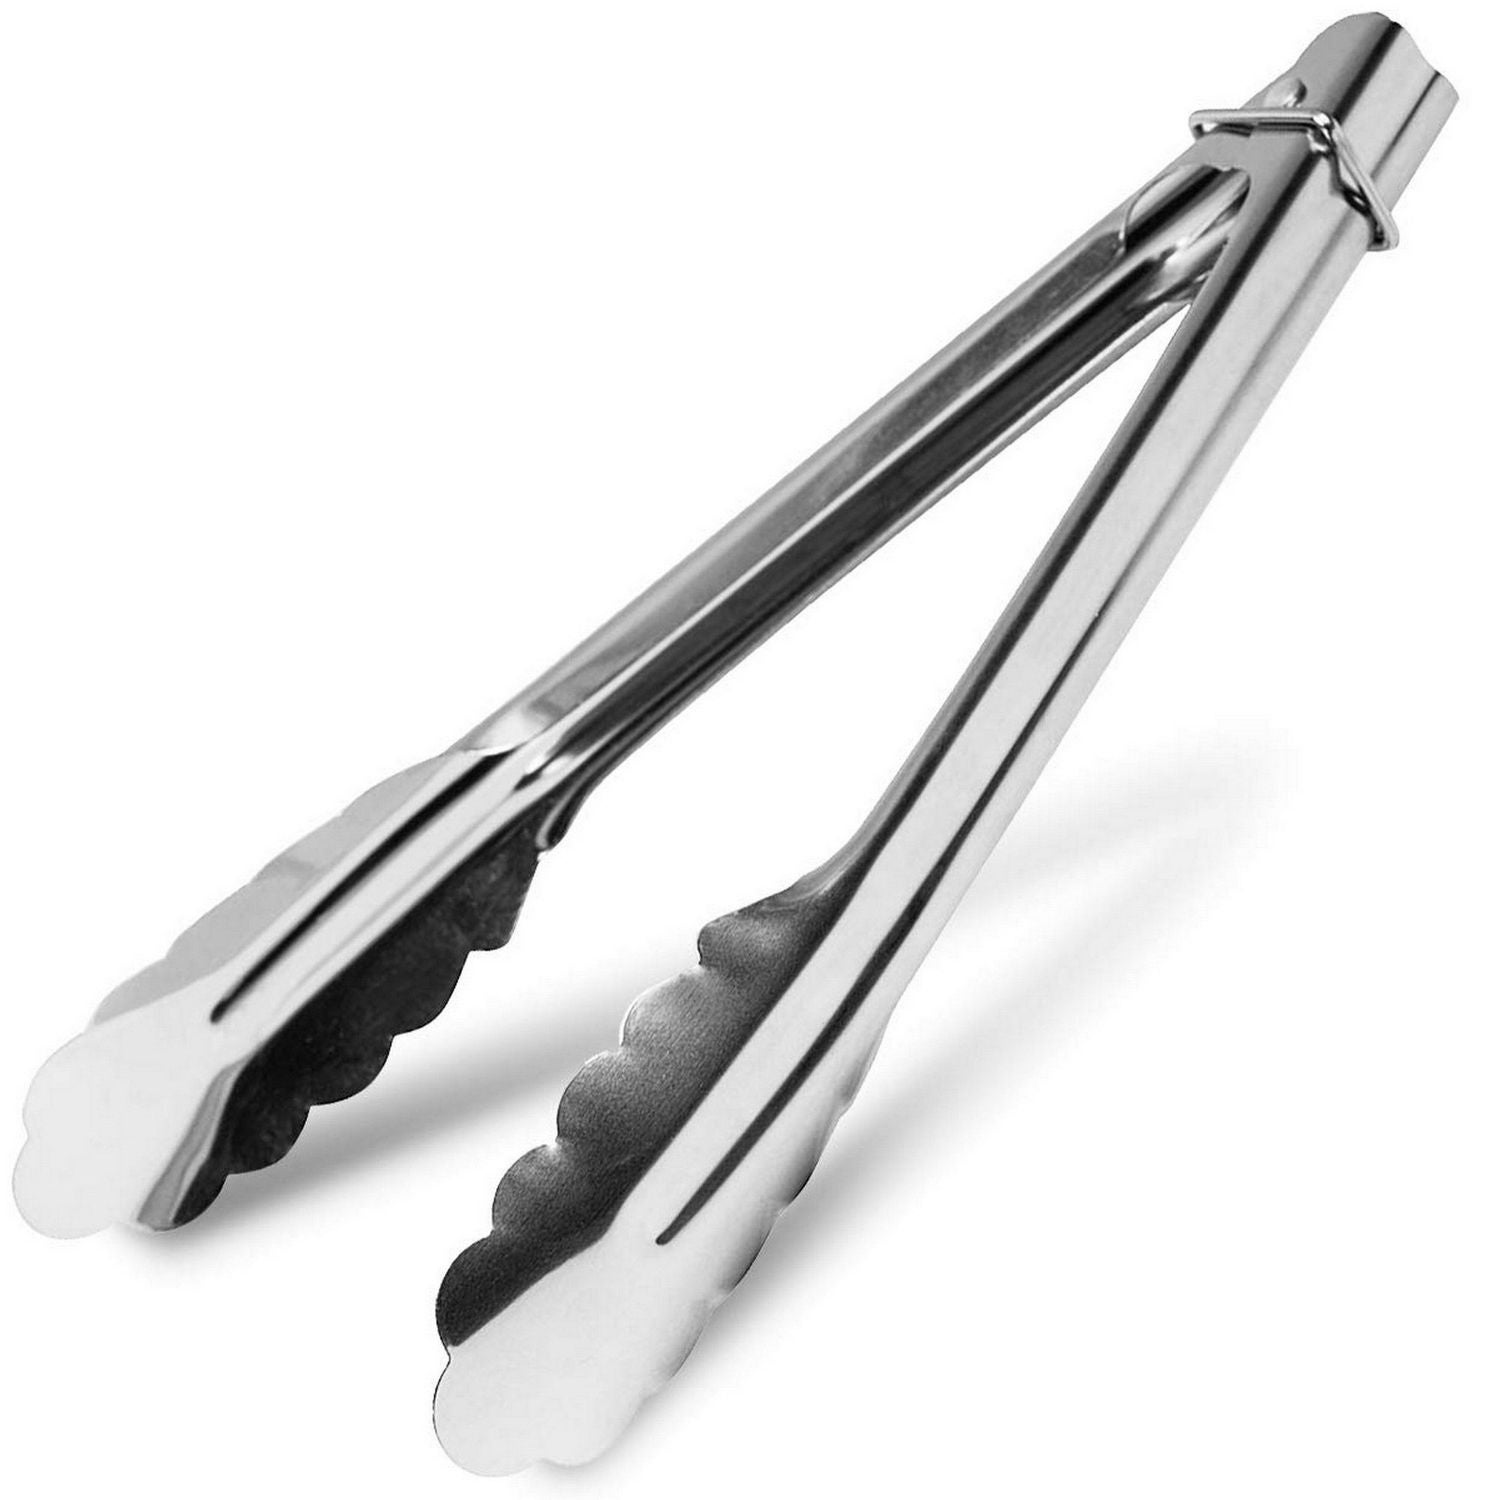 3 Pcs Small Stainless Steel Kitchen BBQ Grilling Tongs, 9